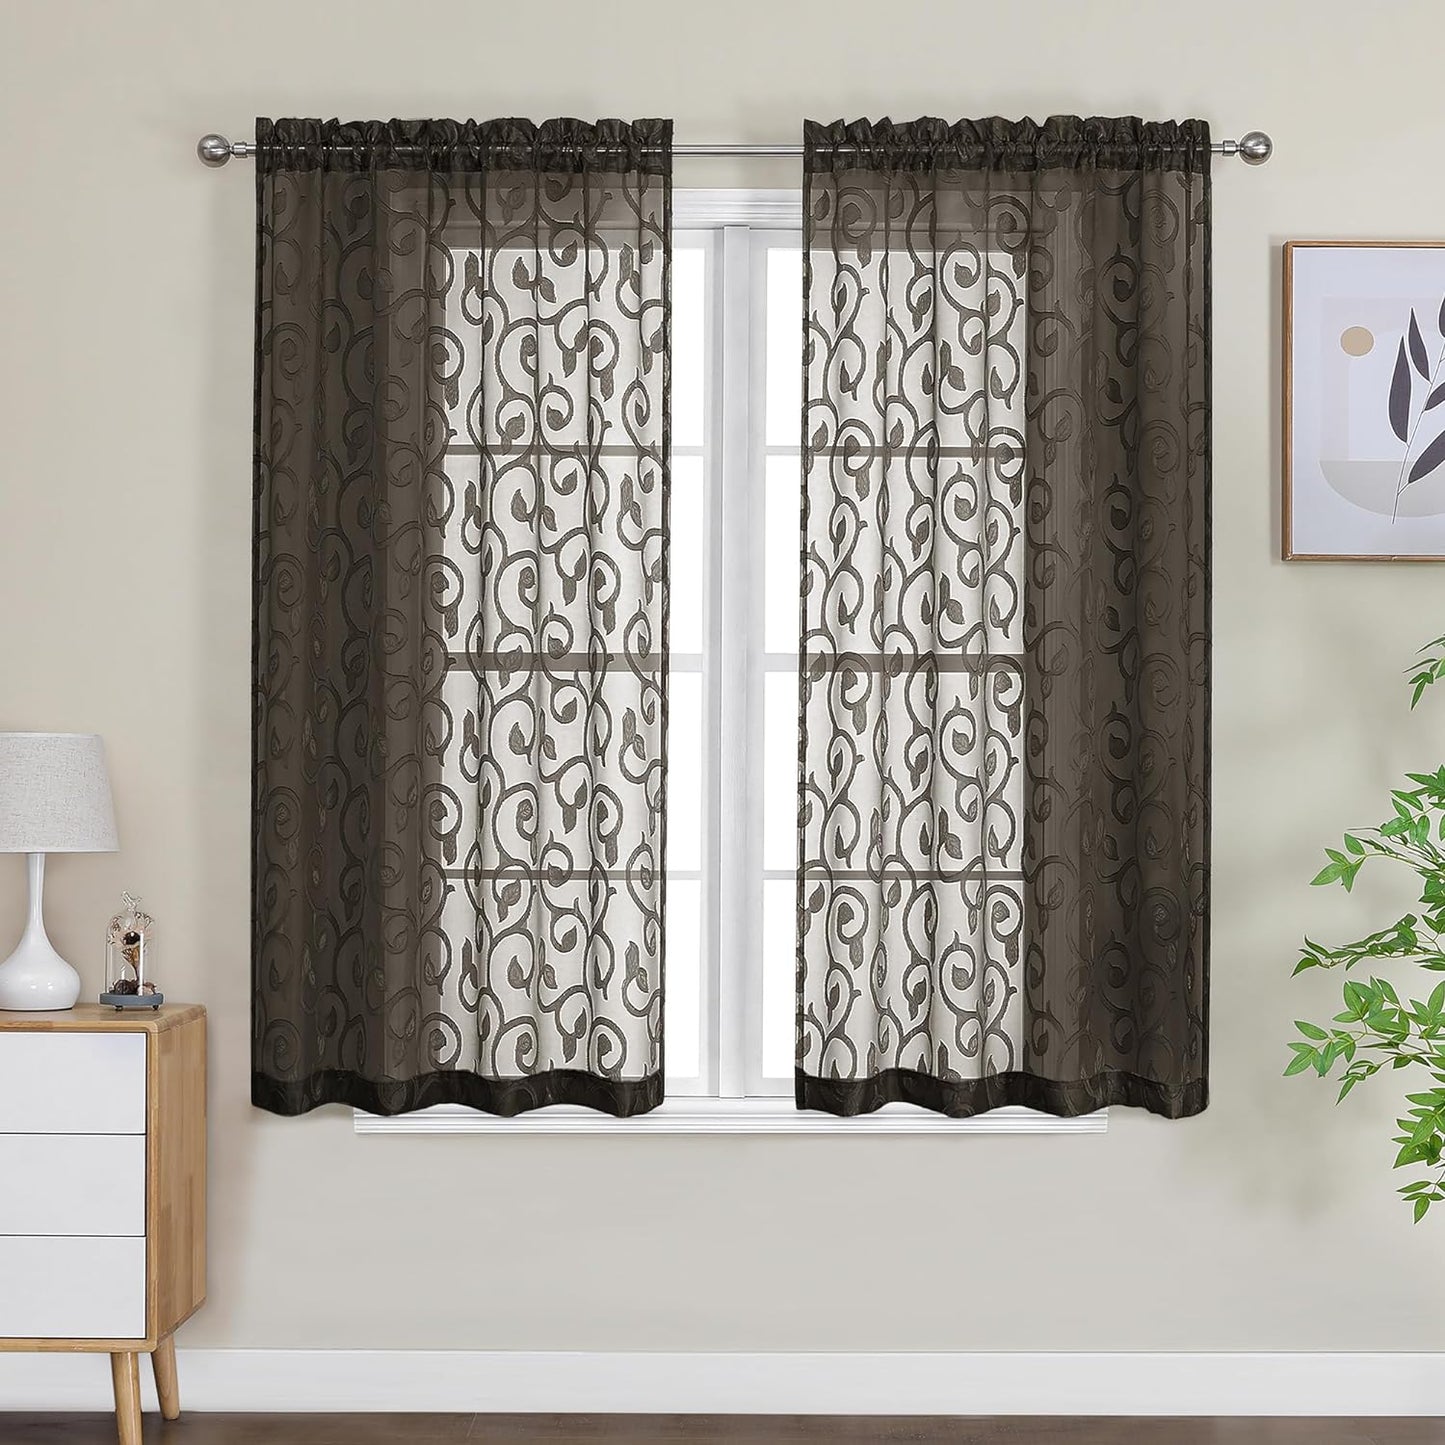 OWENIE Furman Sheer White Curtains 84 Inches Long for Bedroom Living Room 2 Panels Set, White Curtains Jacquard Clip Light Filtering Semi Sheer Curtain Transparent Rod Pocket Window Drapes, 2 Pcs  OWENIE Chocolate 28W X 45L 